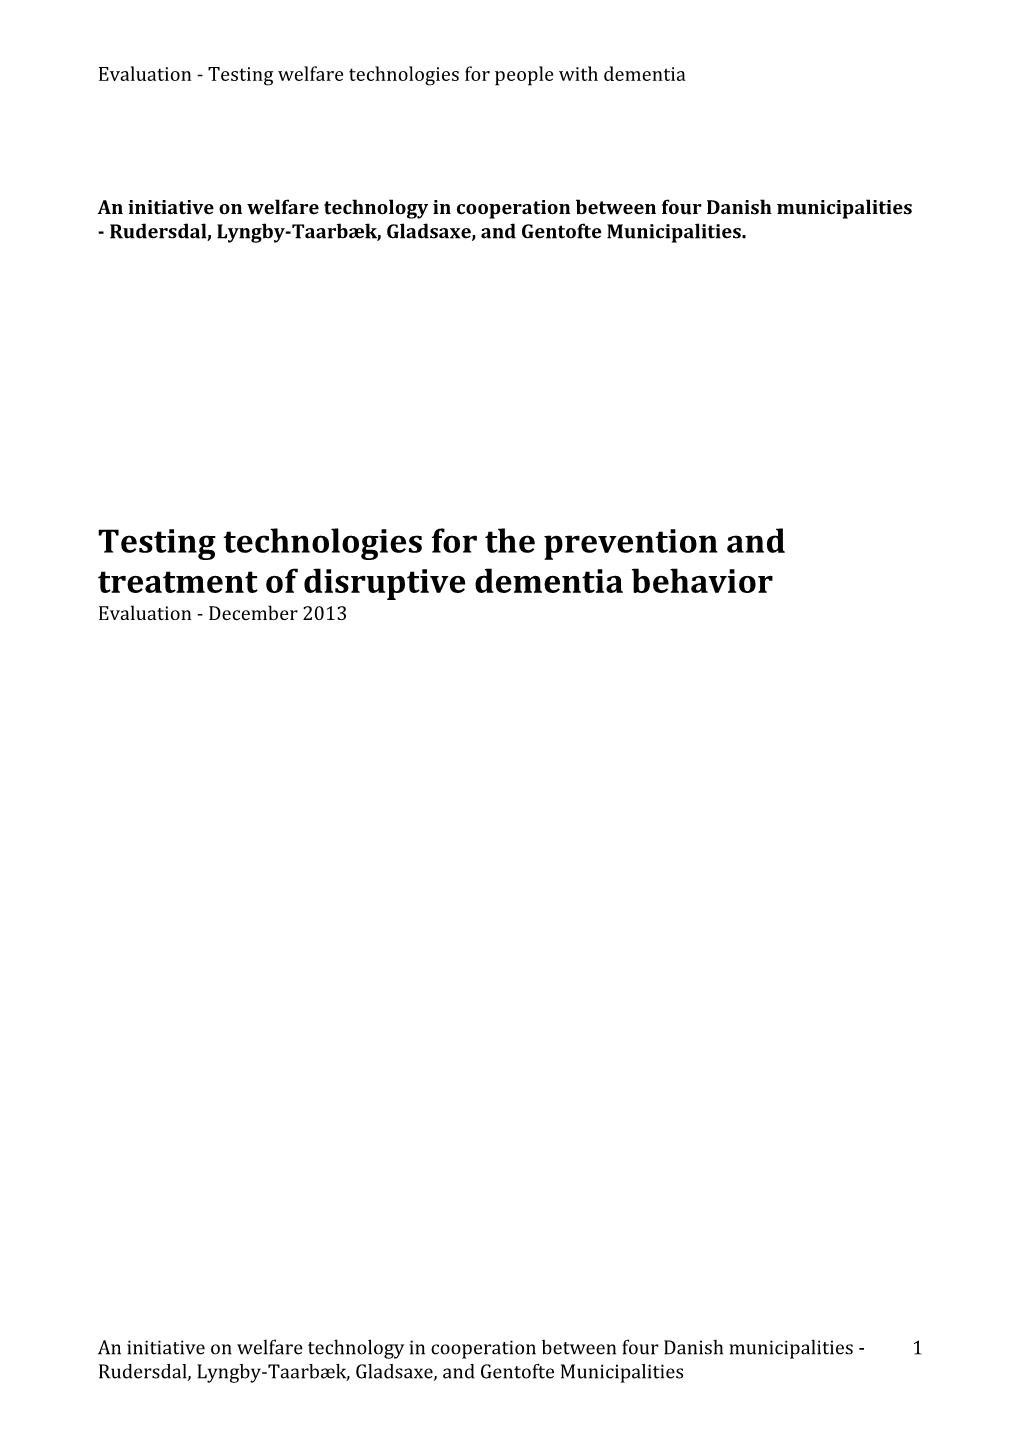 Testing Technologies for the Prevention and Treatment of Disruptive Dementia Behavior Evaluation - December 2013